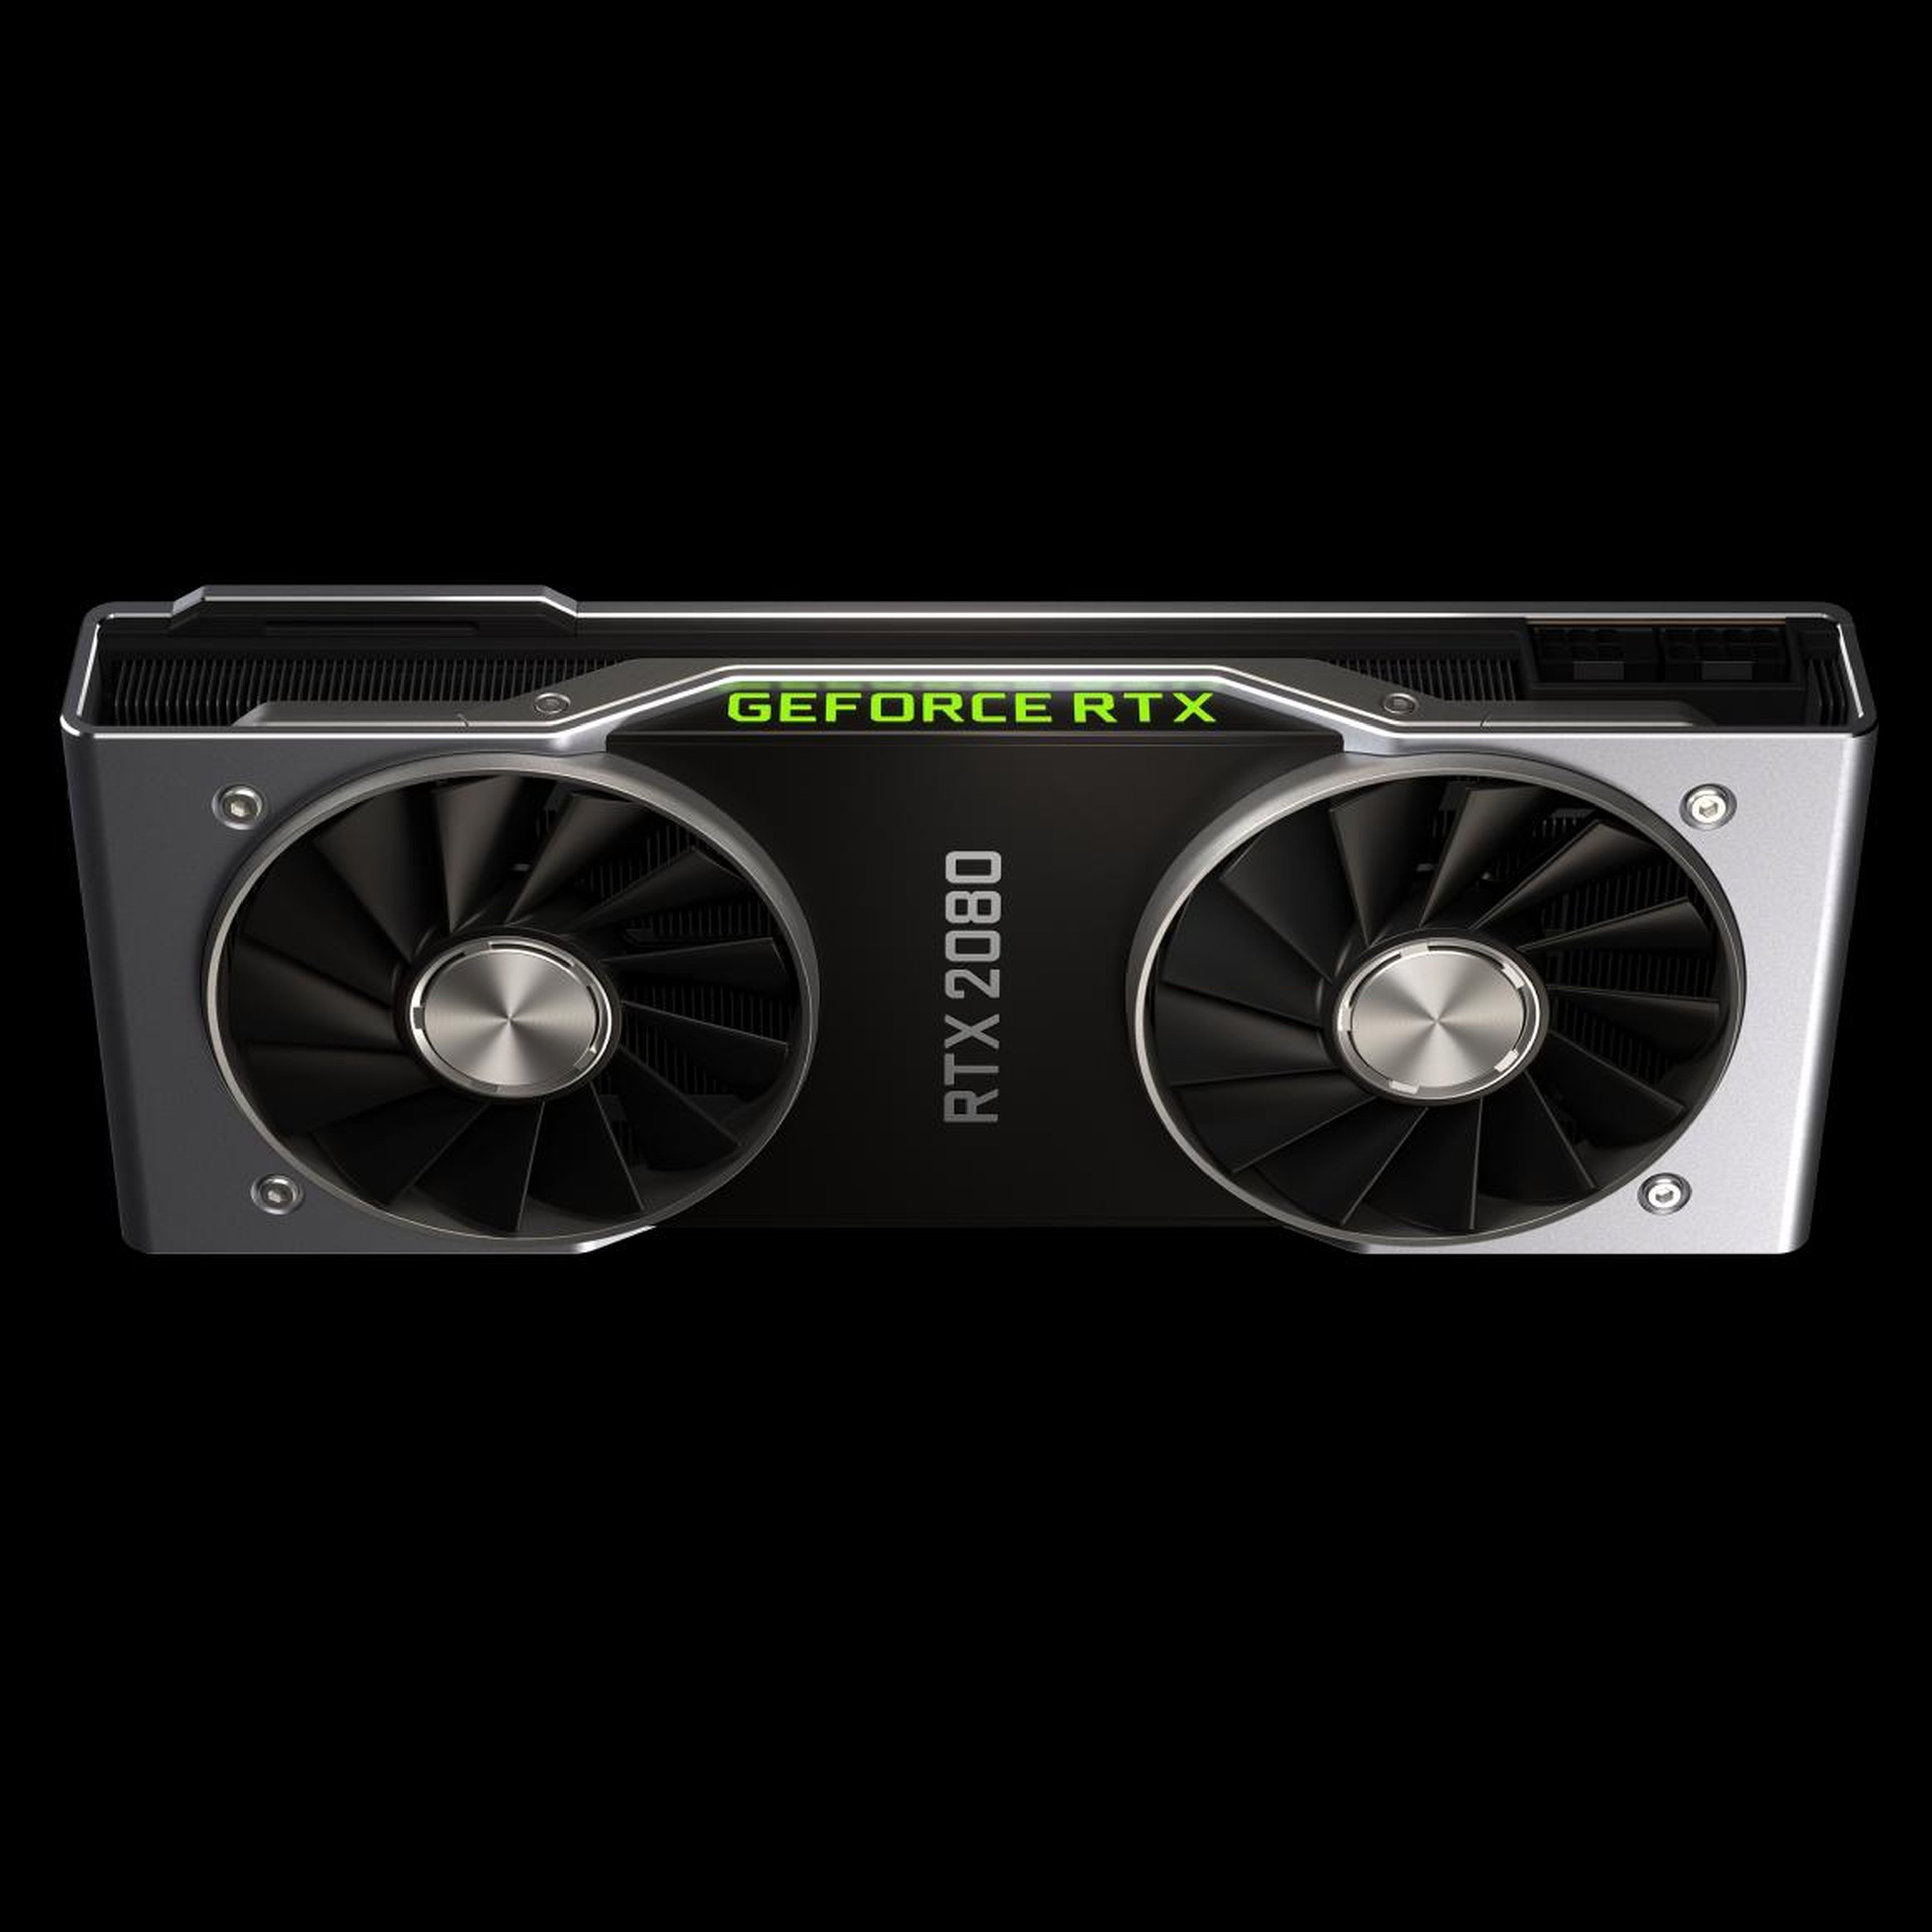 The RTX 2080 is the middle-range card of the three, and is available for pre-order.